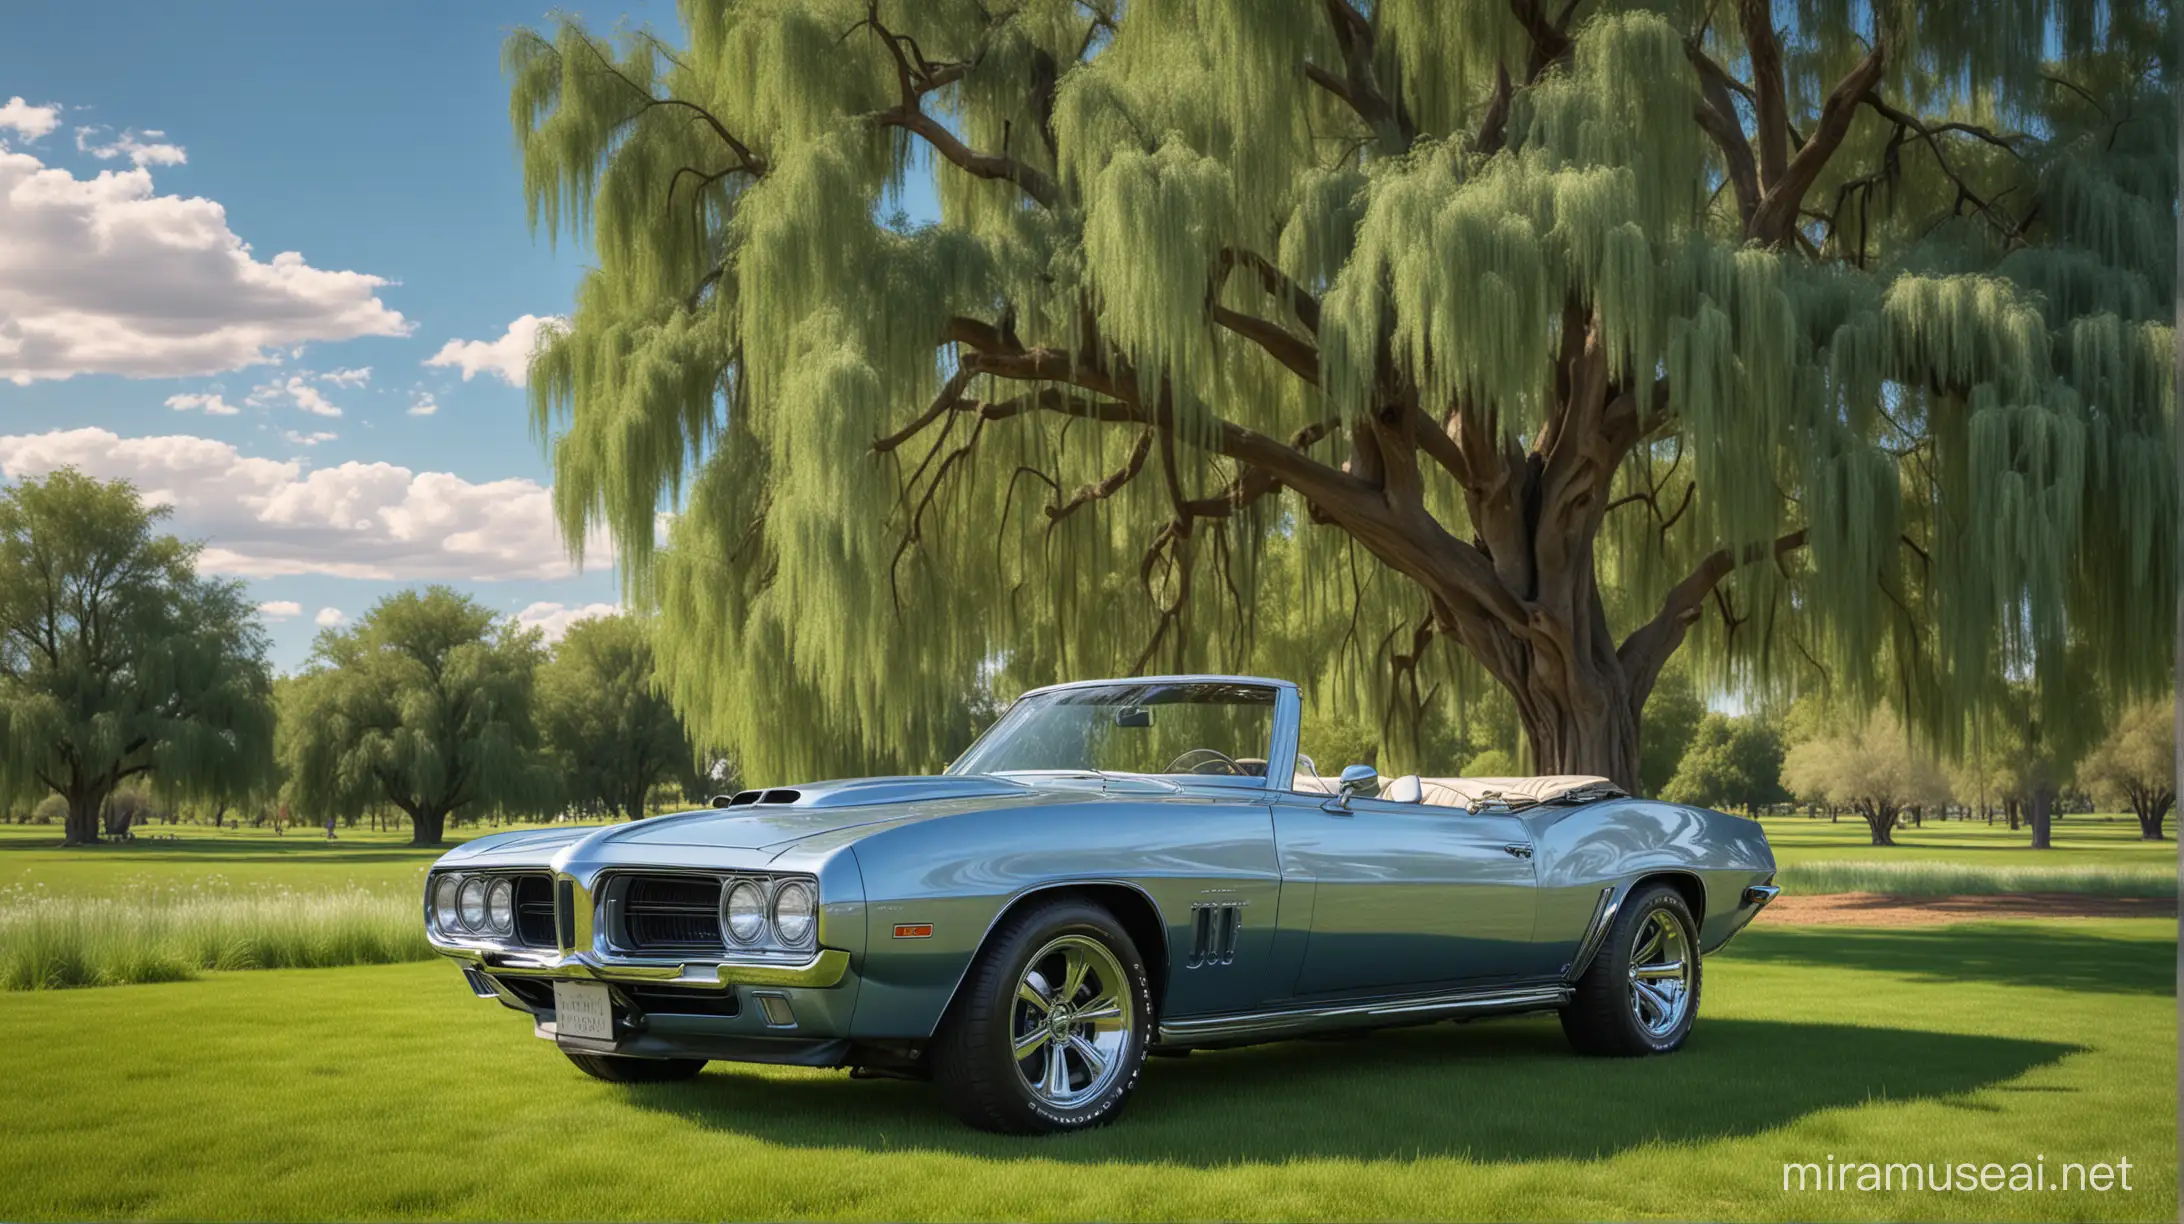 Silver and Blue Chrome 1969 Firebird Convertible on Lush Green Lawn